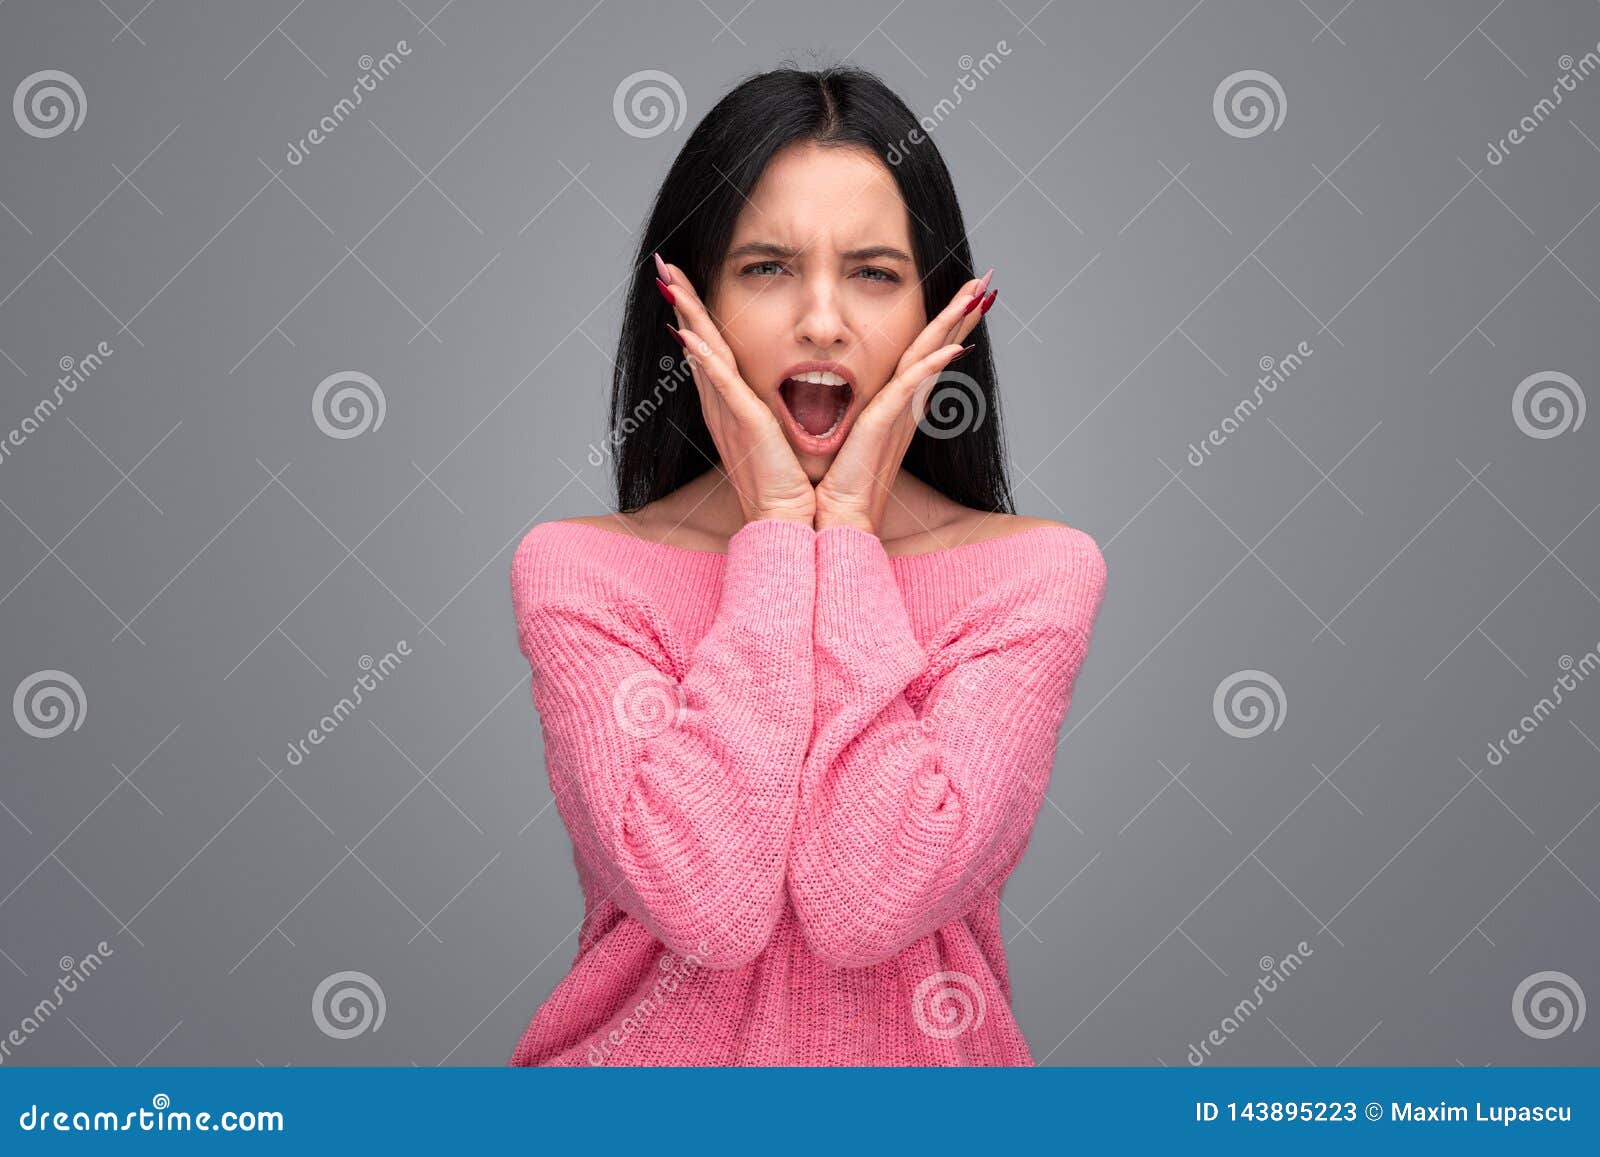 Shocked Woman Screaming At Camera Stock Image Image Of Disbelief